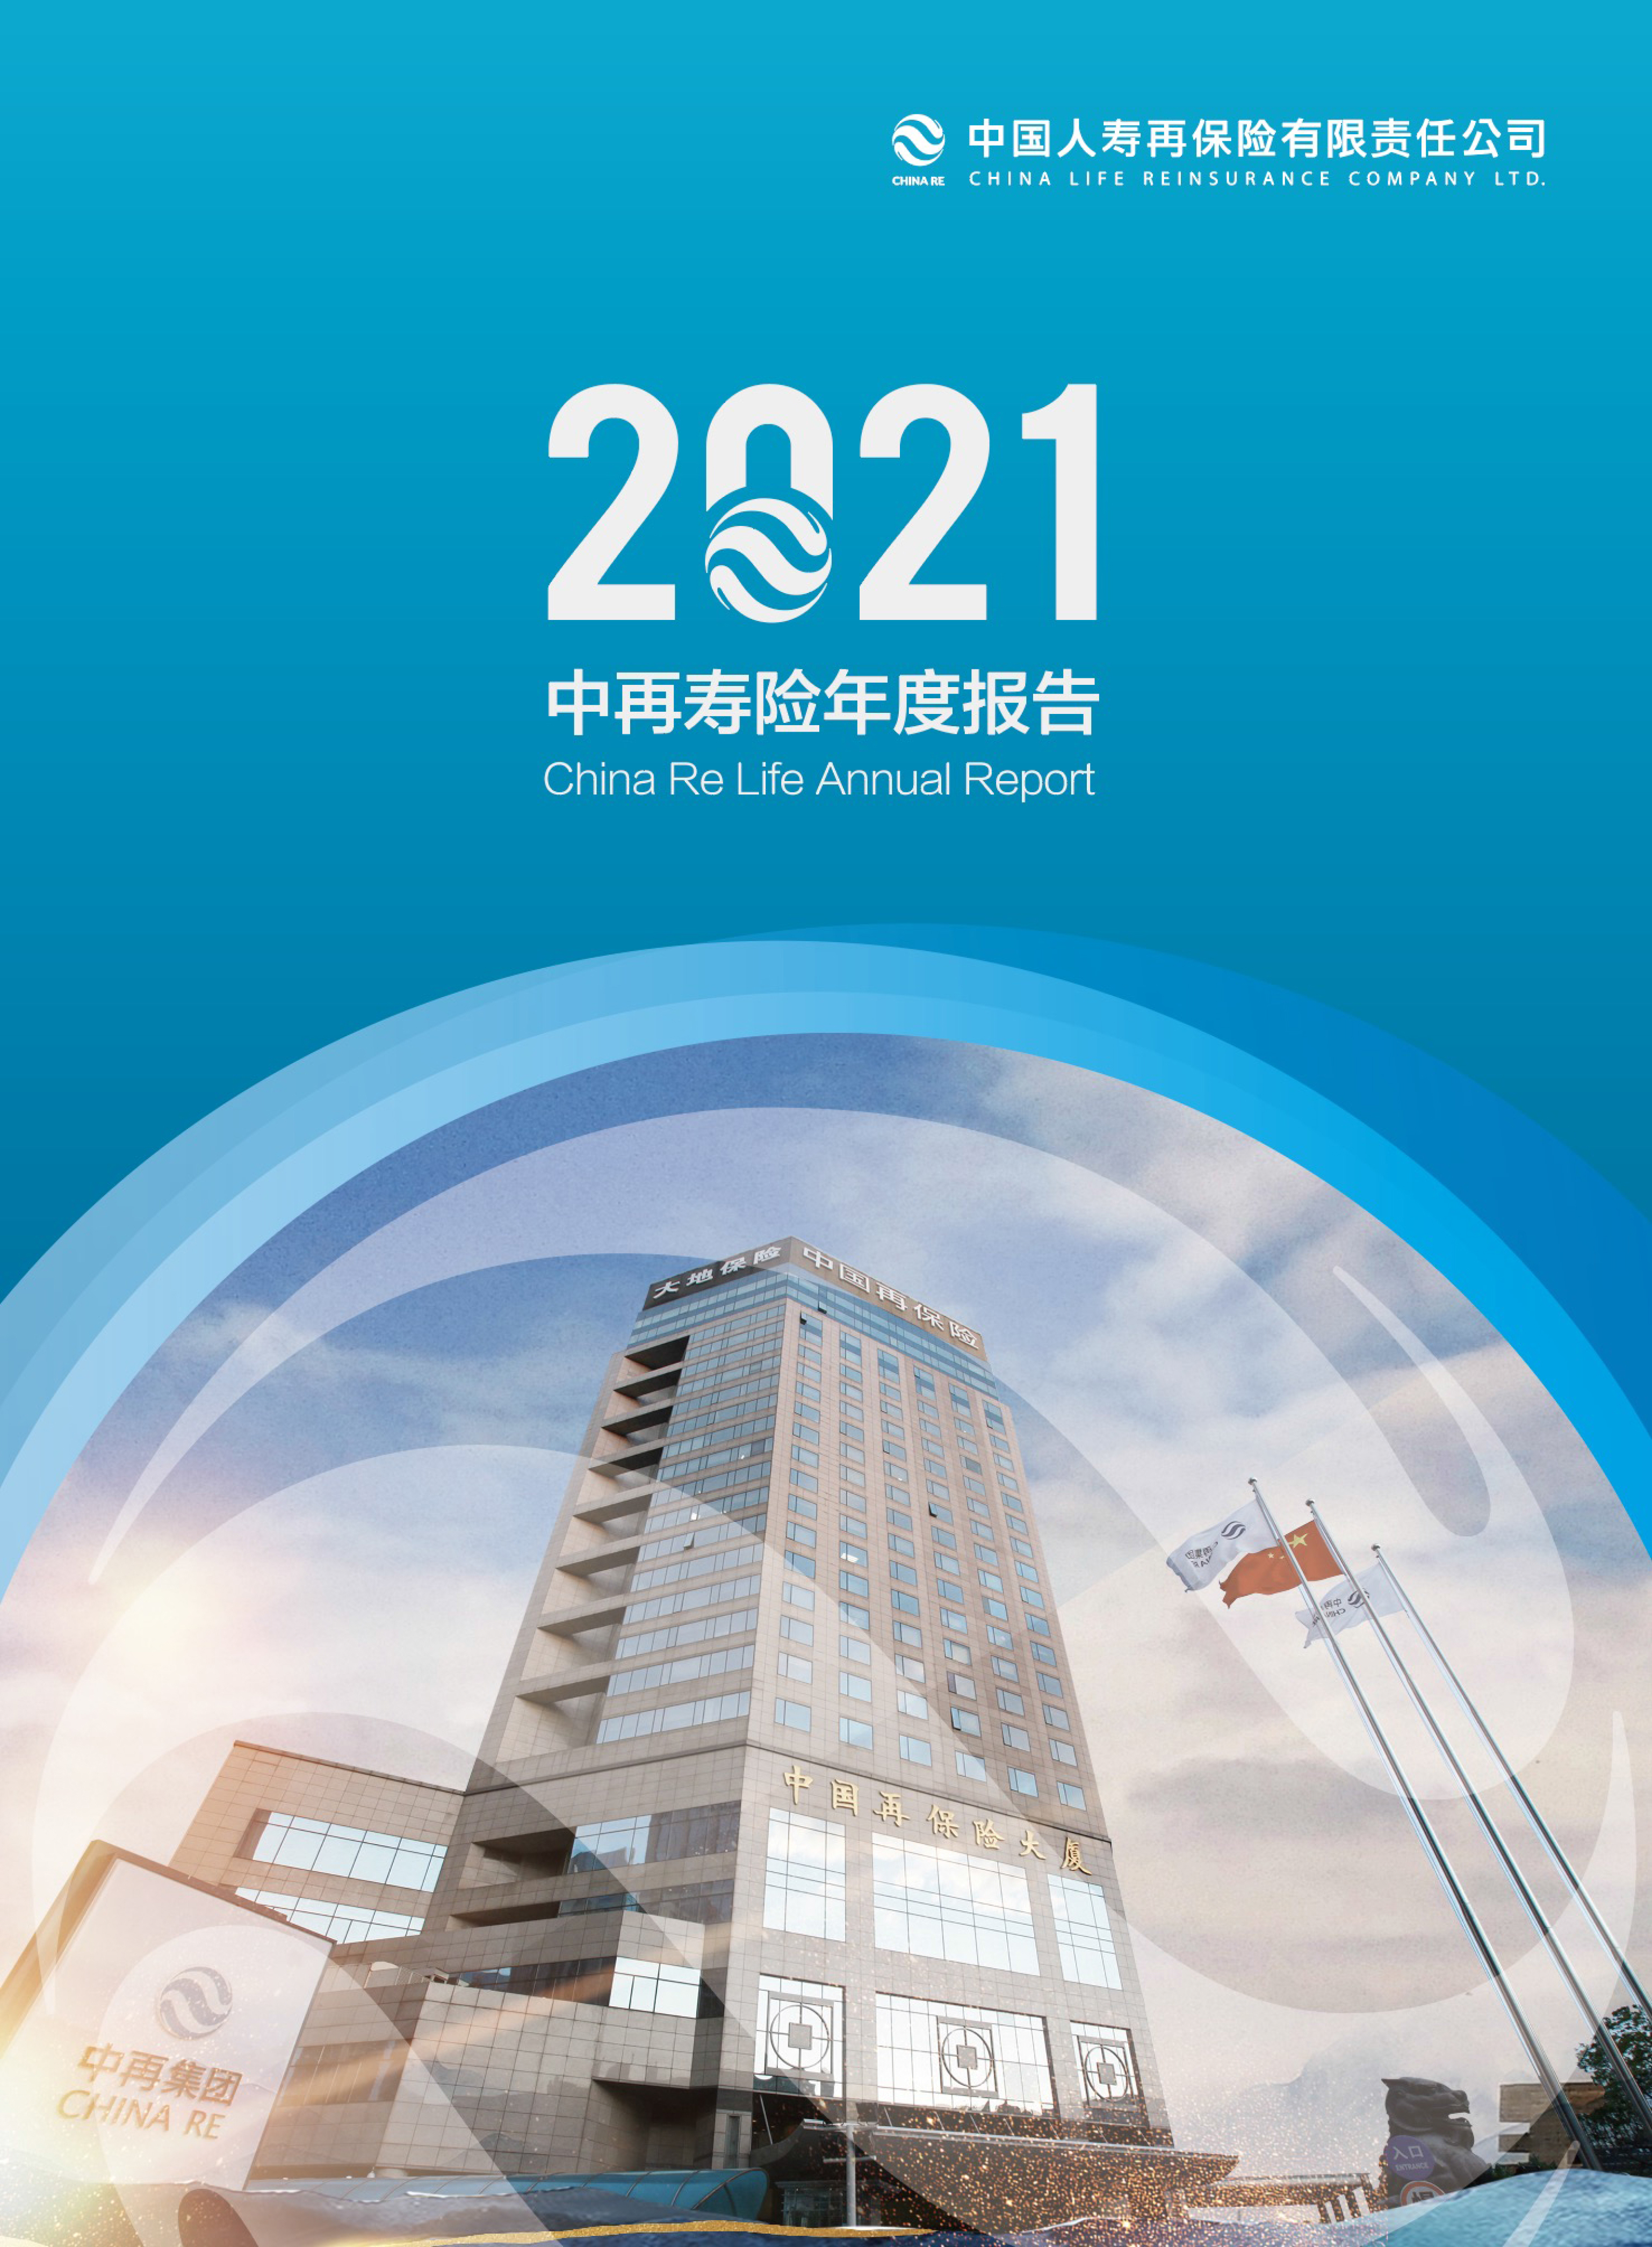 China Re Life 2021 Annual Report